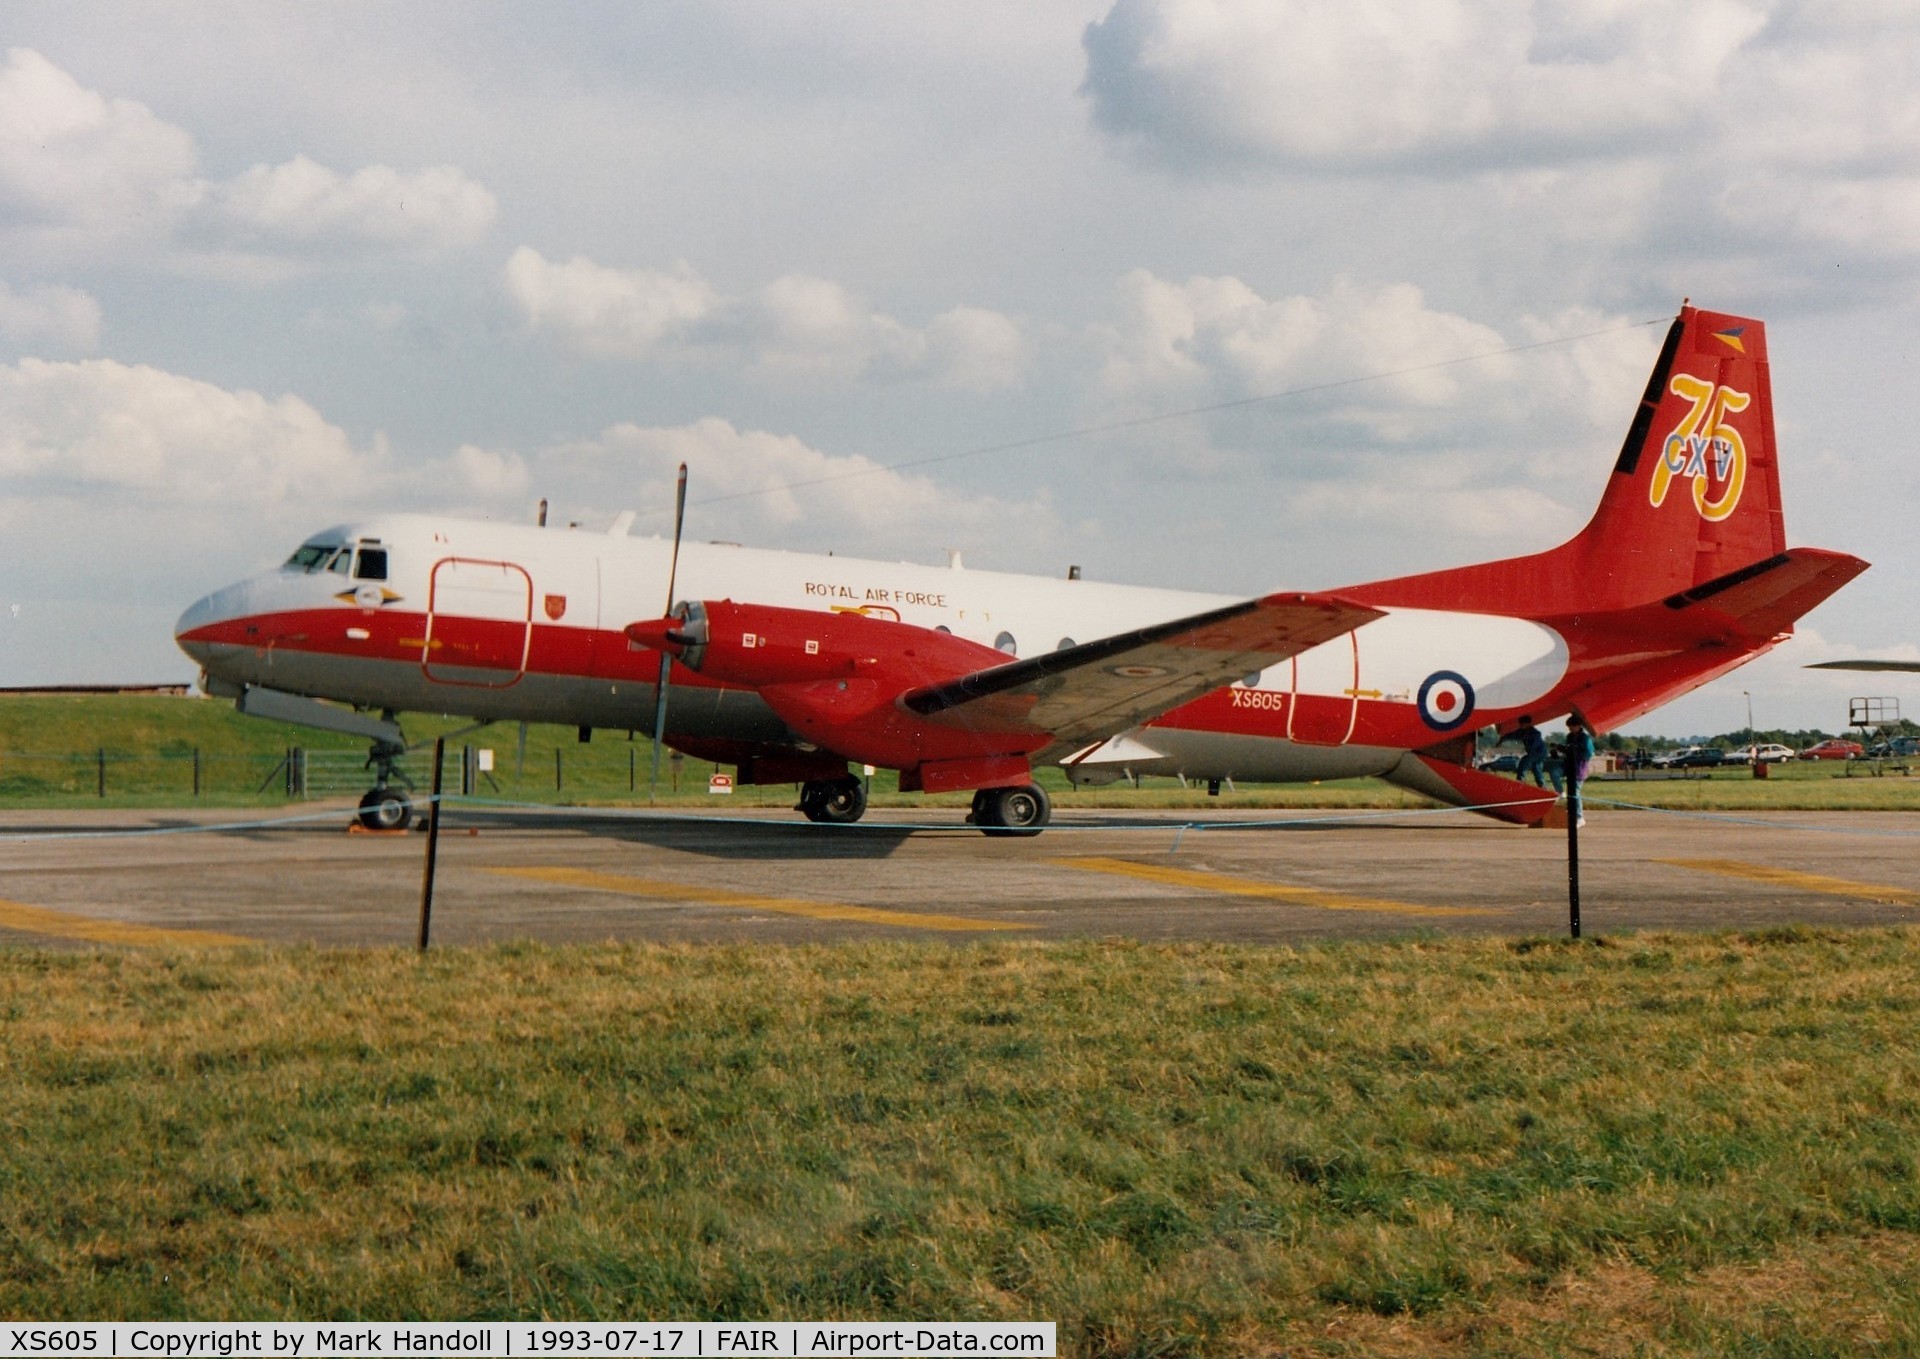 XS605, 1966 Hawker Siddeley HS-780 Andover E3 C/N BN12, XS605 pictured at IAT Fairford in July 1993.